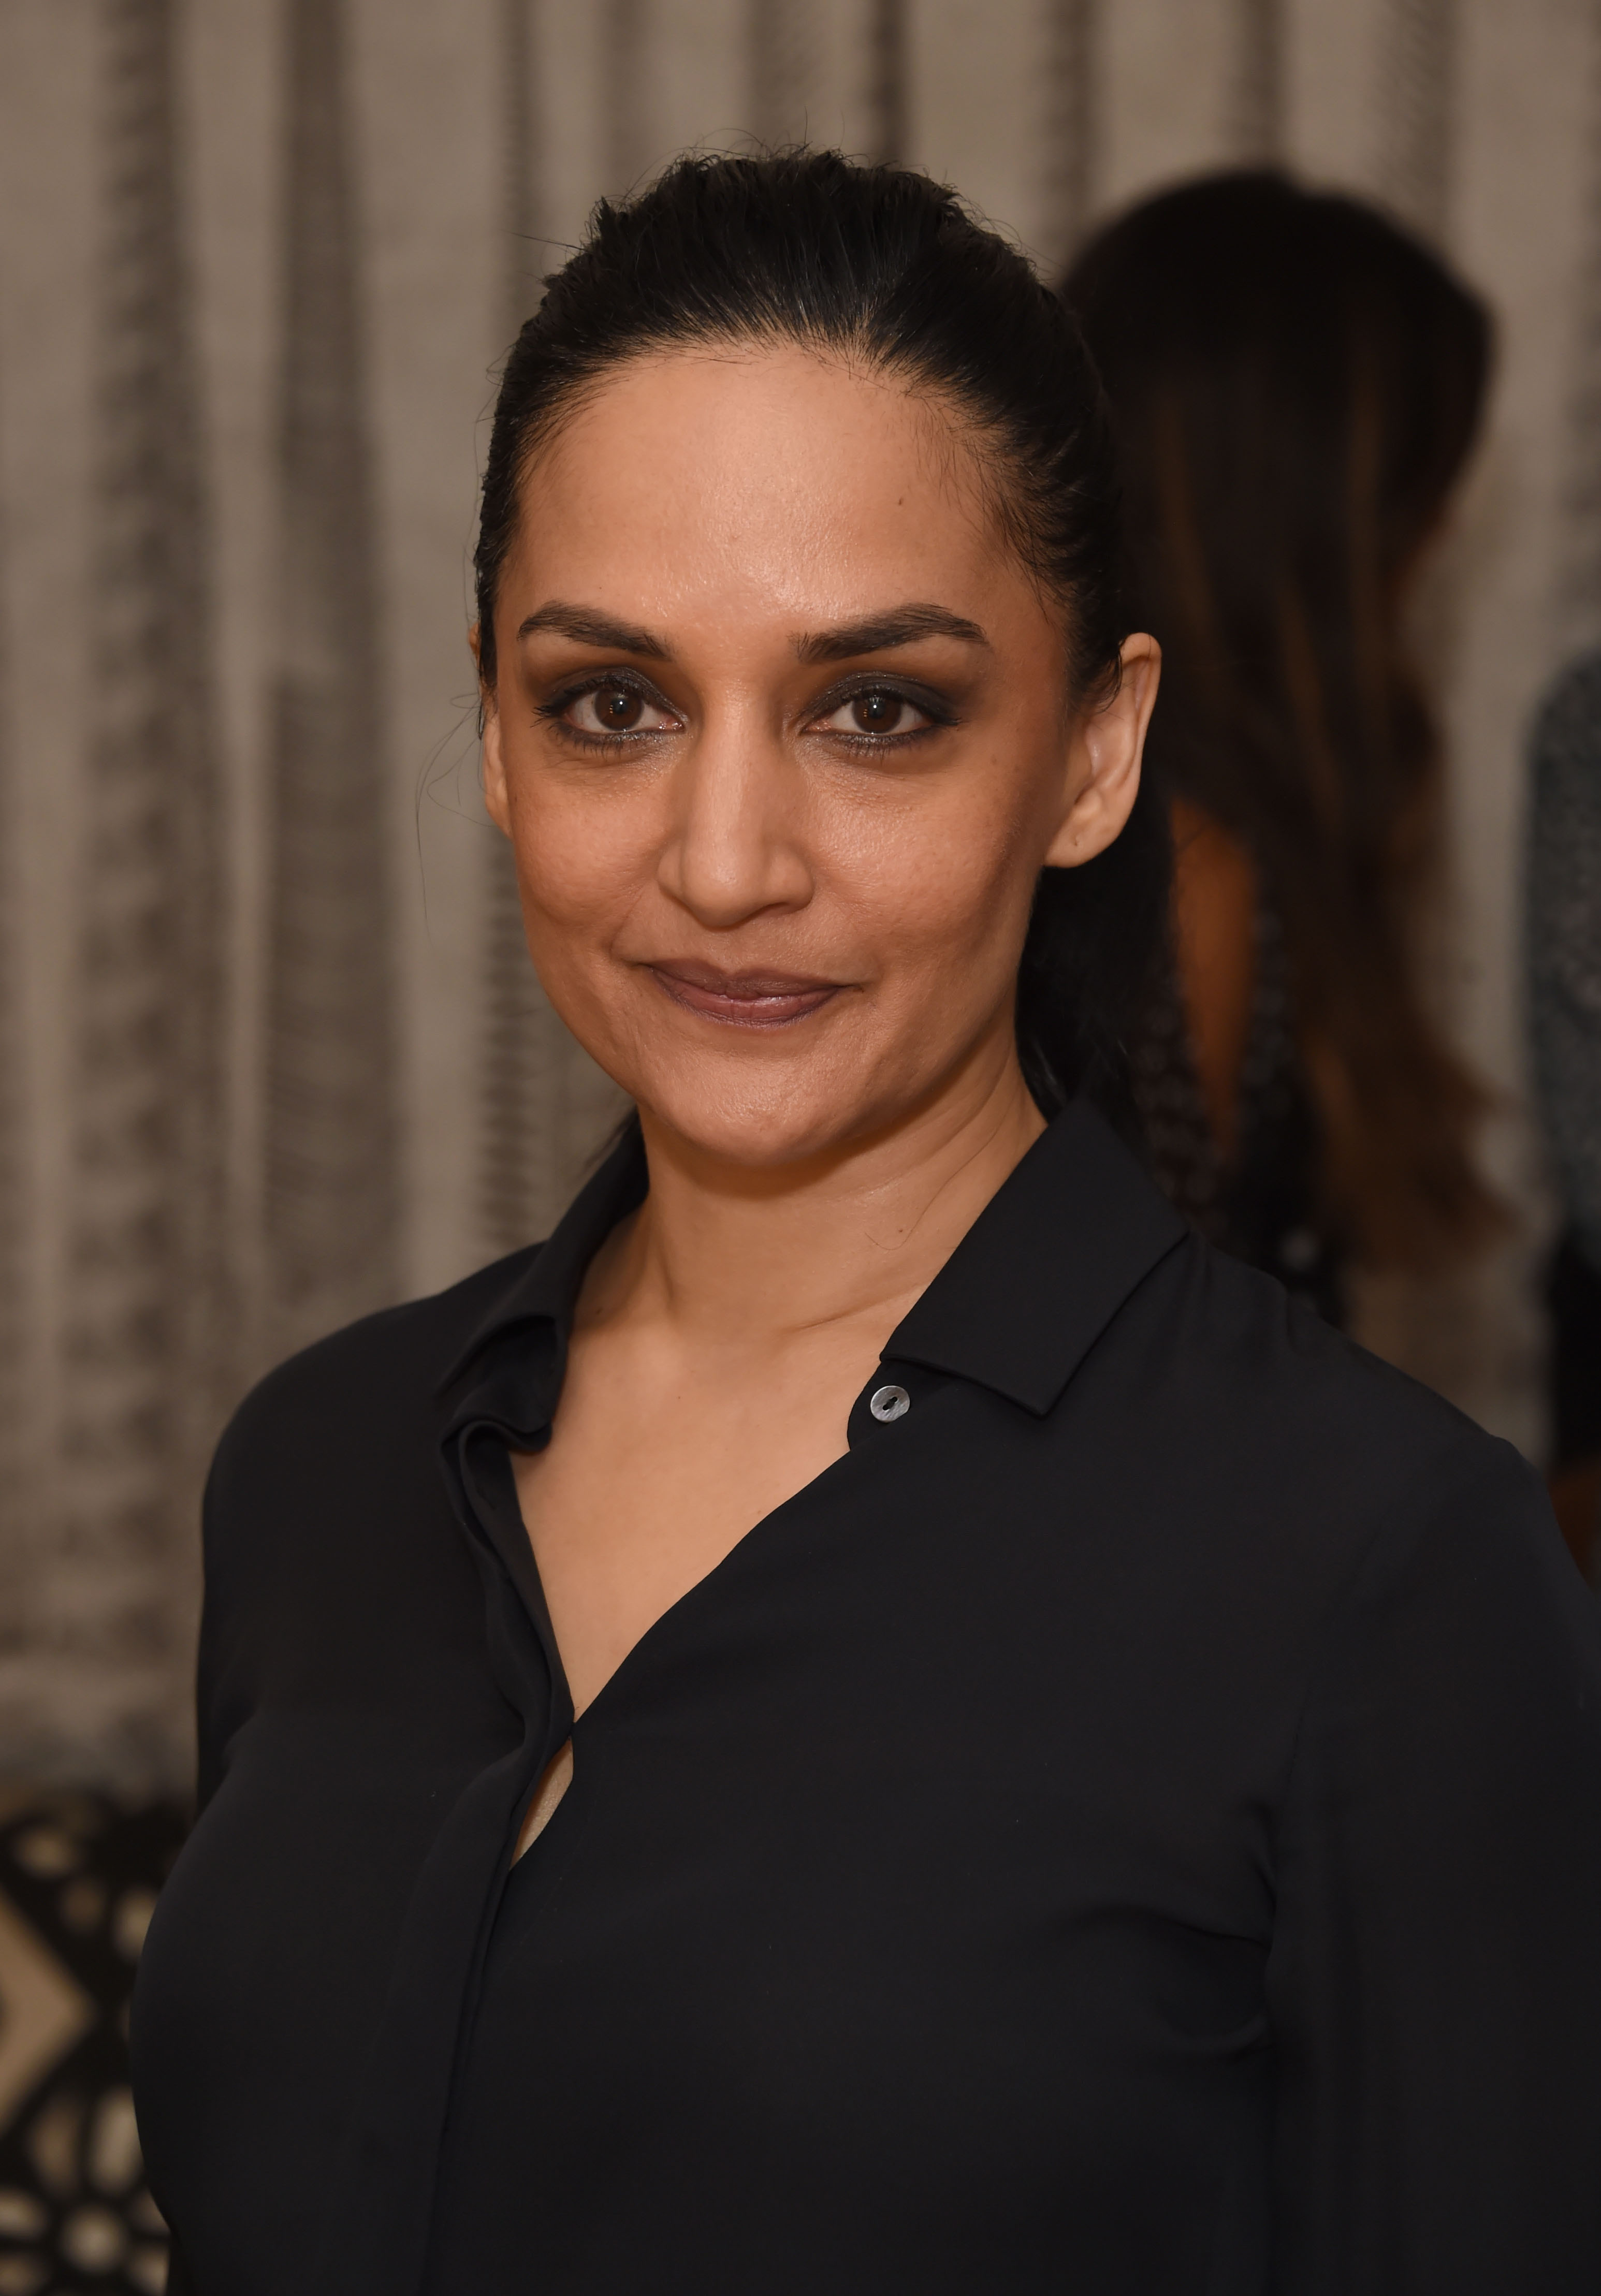 Archie Panjabi poses at the world premiere of "Departure" at Soho Hotel on July 3, 2019, in London, England | Source: Getty Images